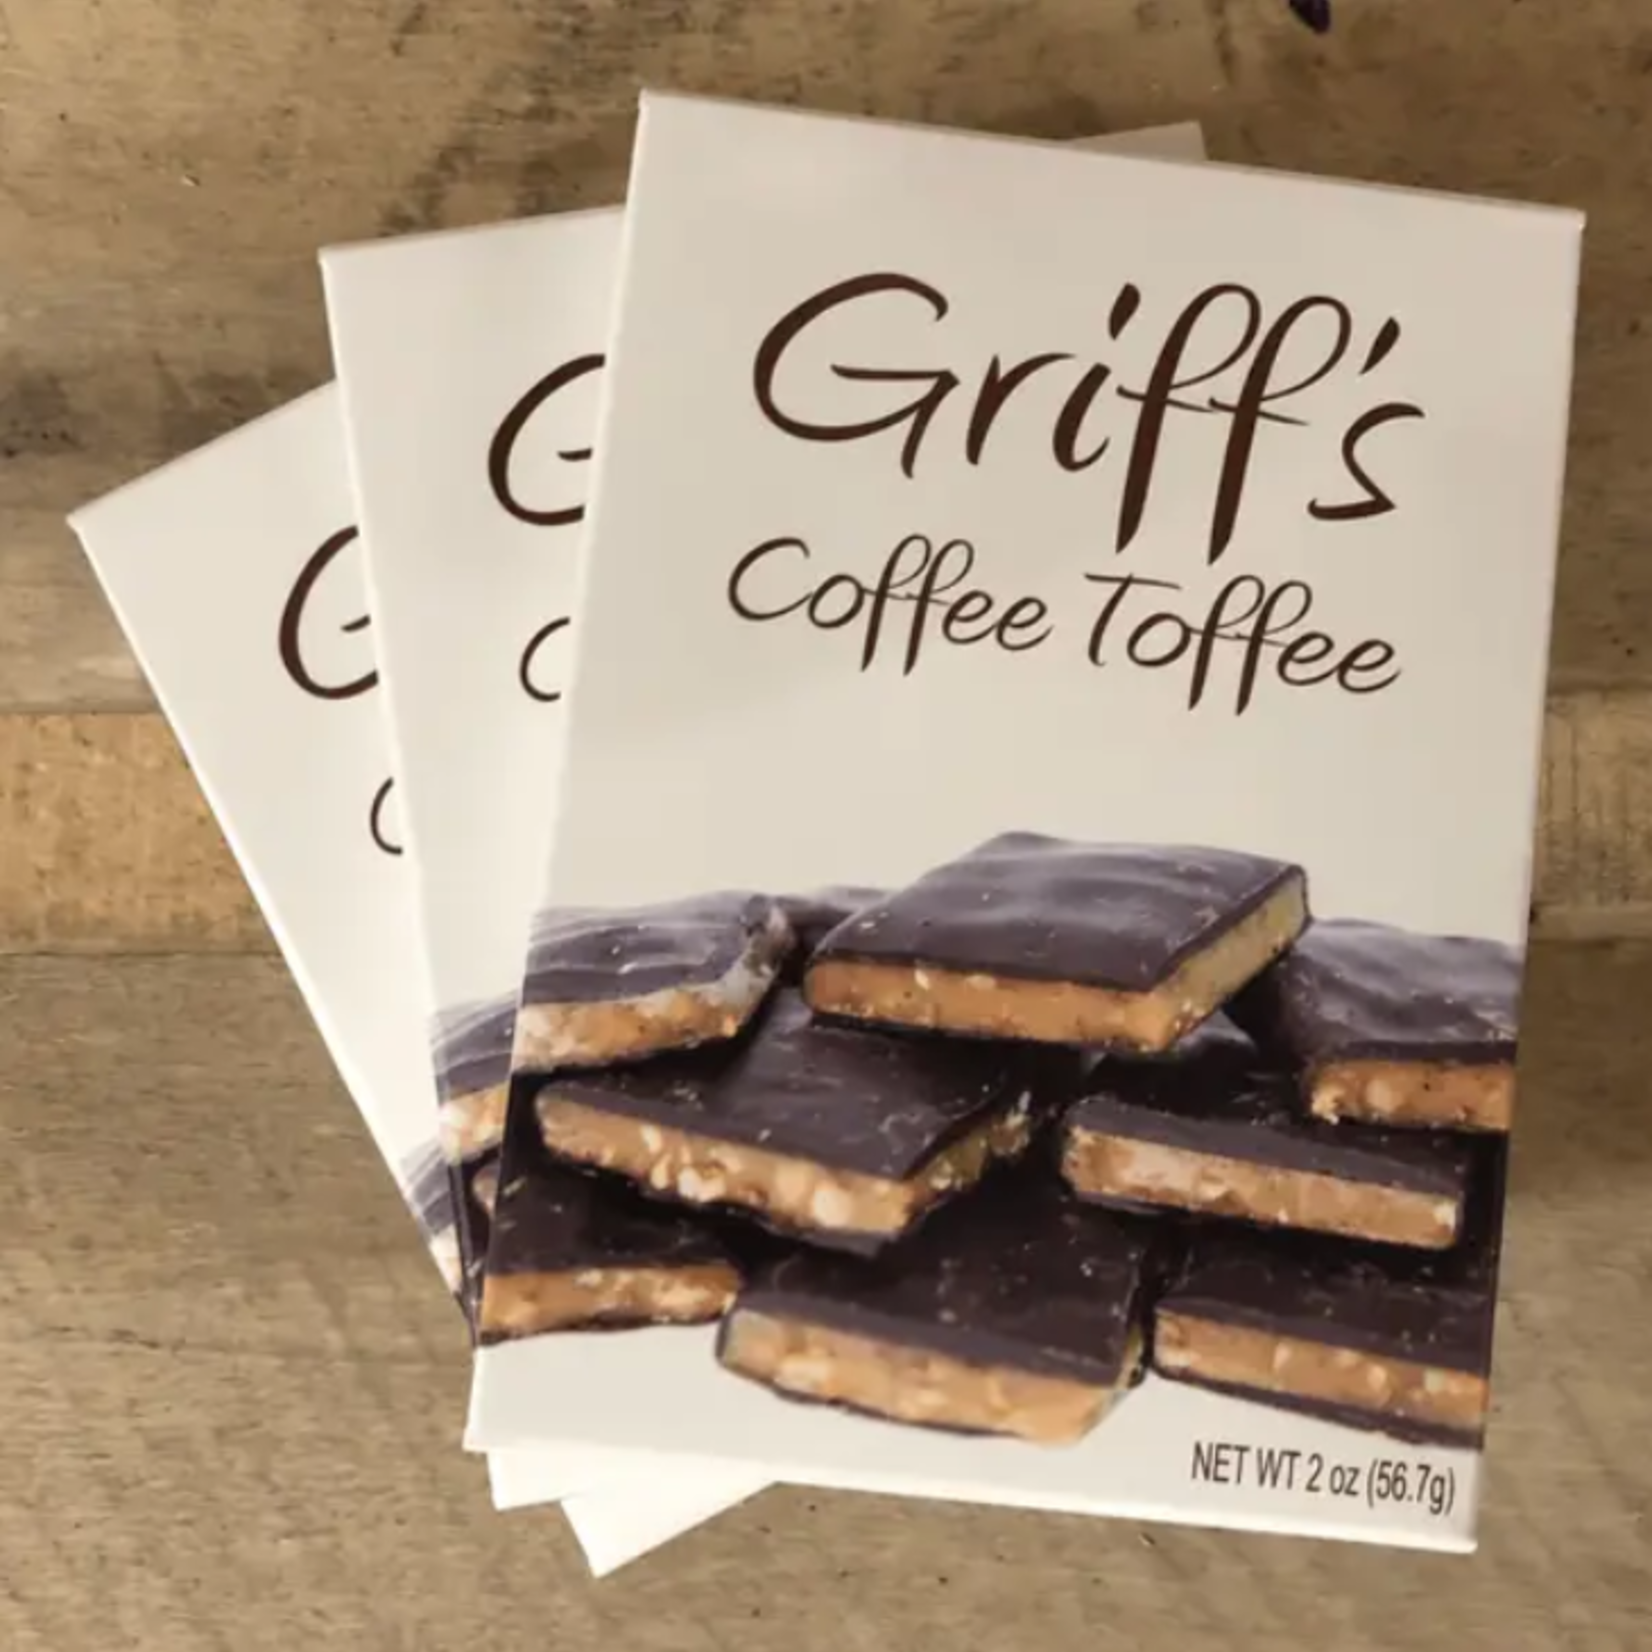 Griff's Toffee Griff's Coffee Toffee 2 oz